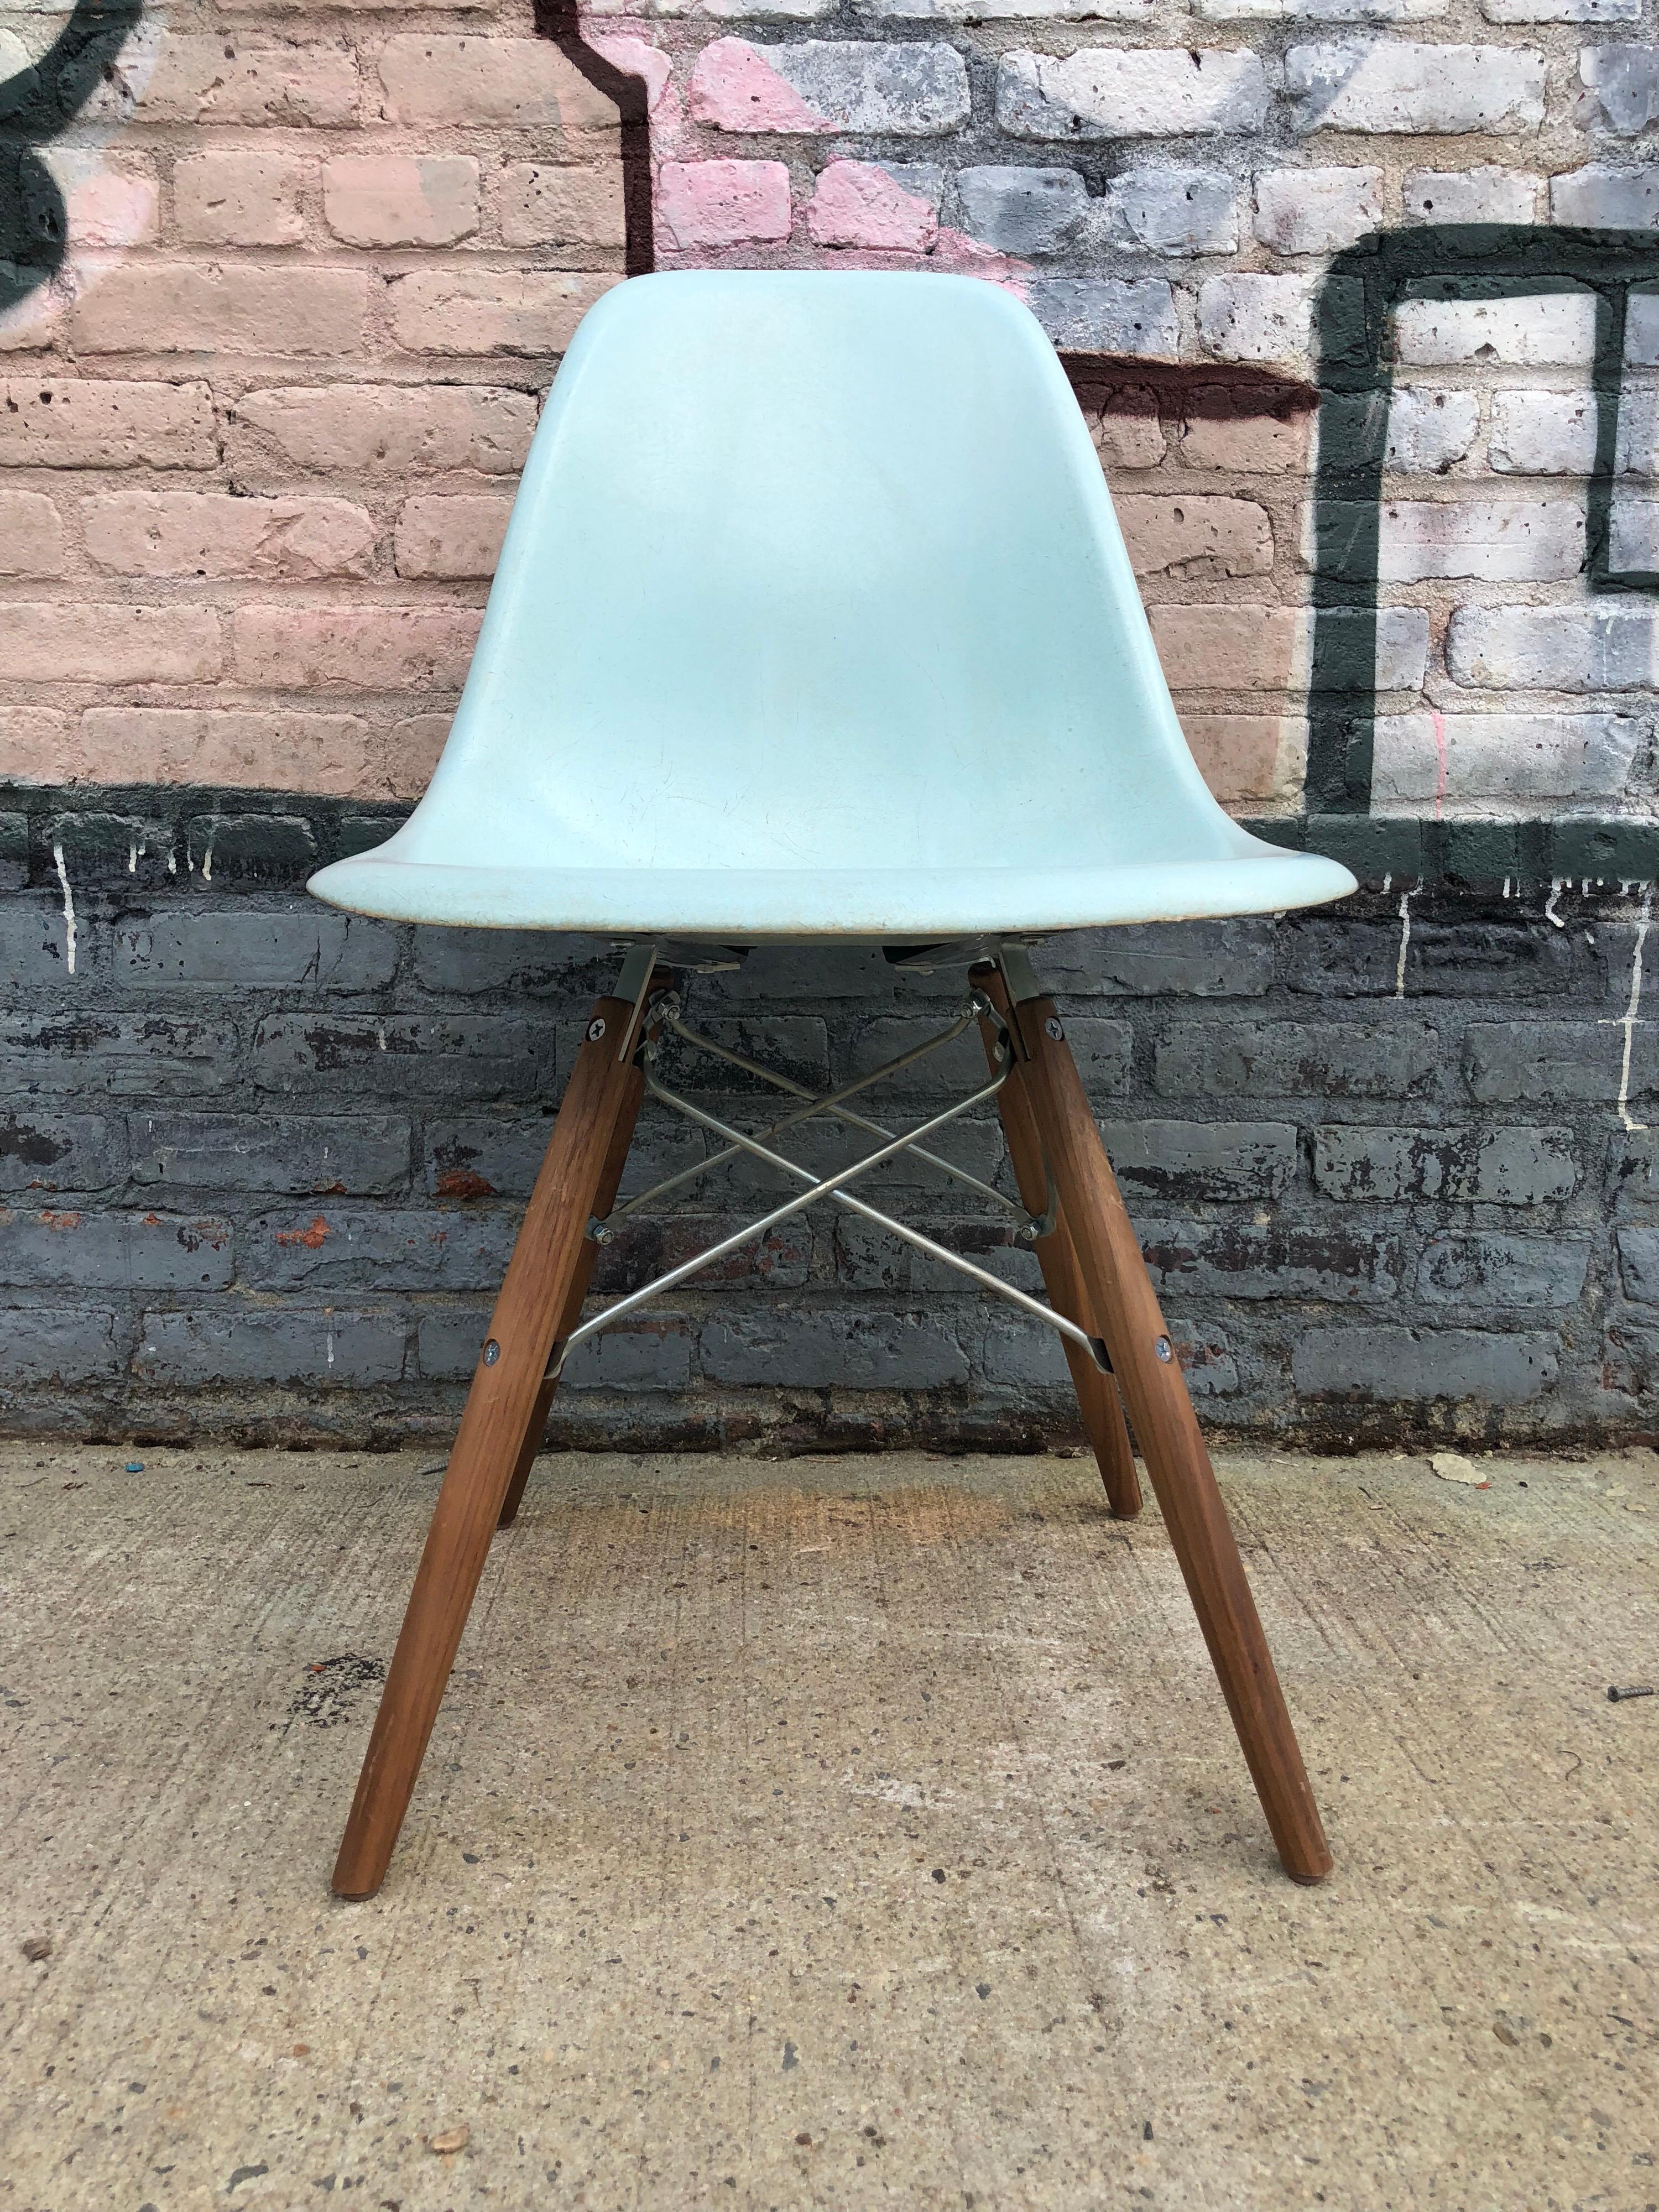 Four rare Herman Miller Eames dining chairs in Robin’s egg blue.